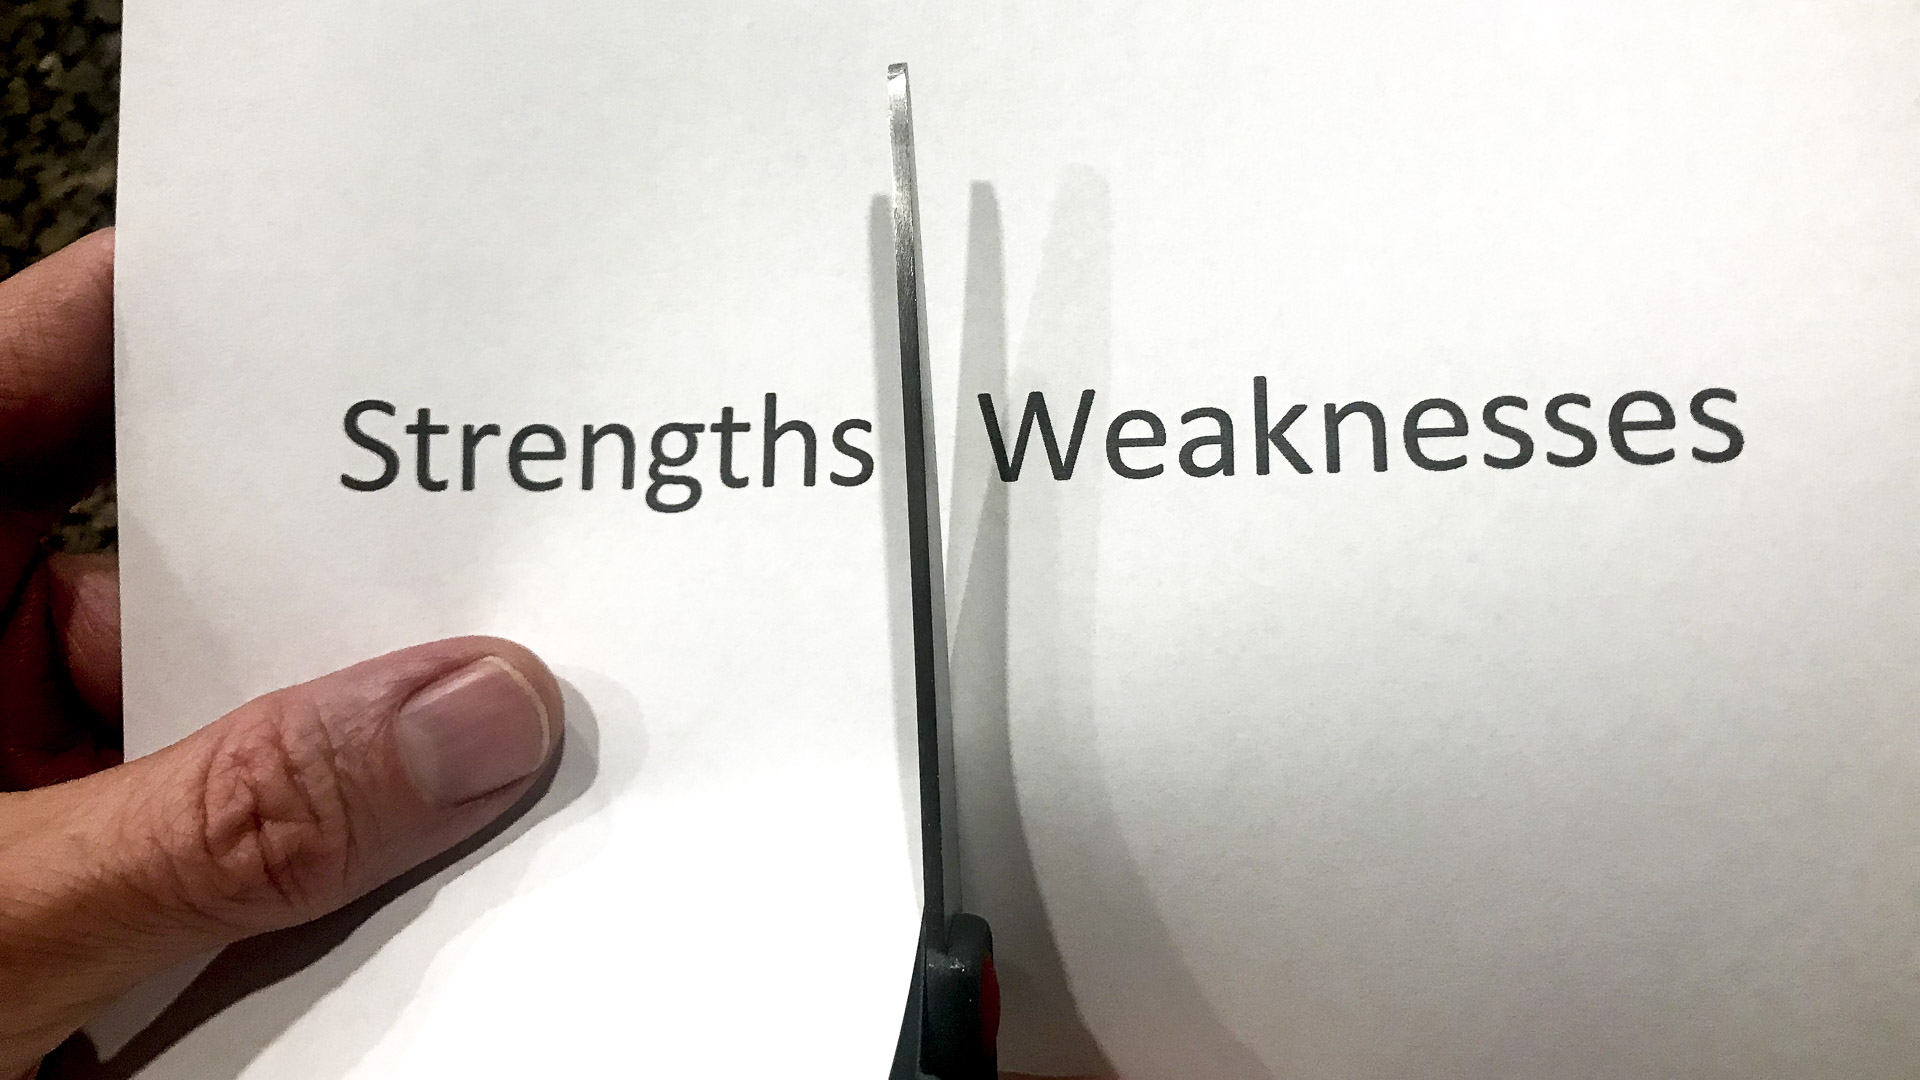 How to Ignore Your Weakness and Focus on Your Strengths for Best Results